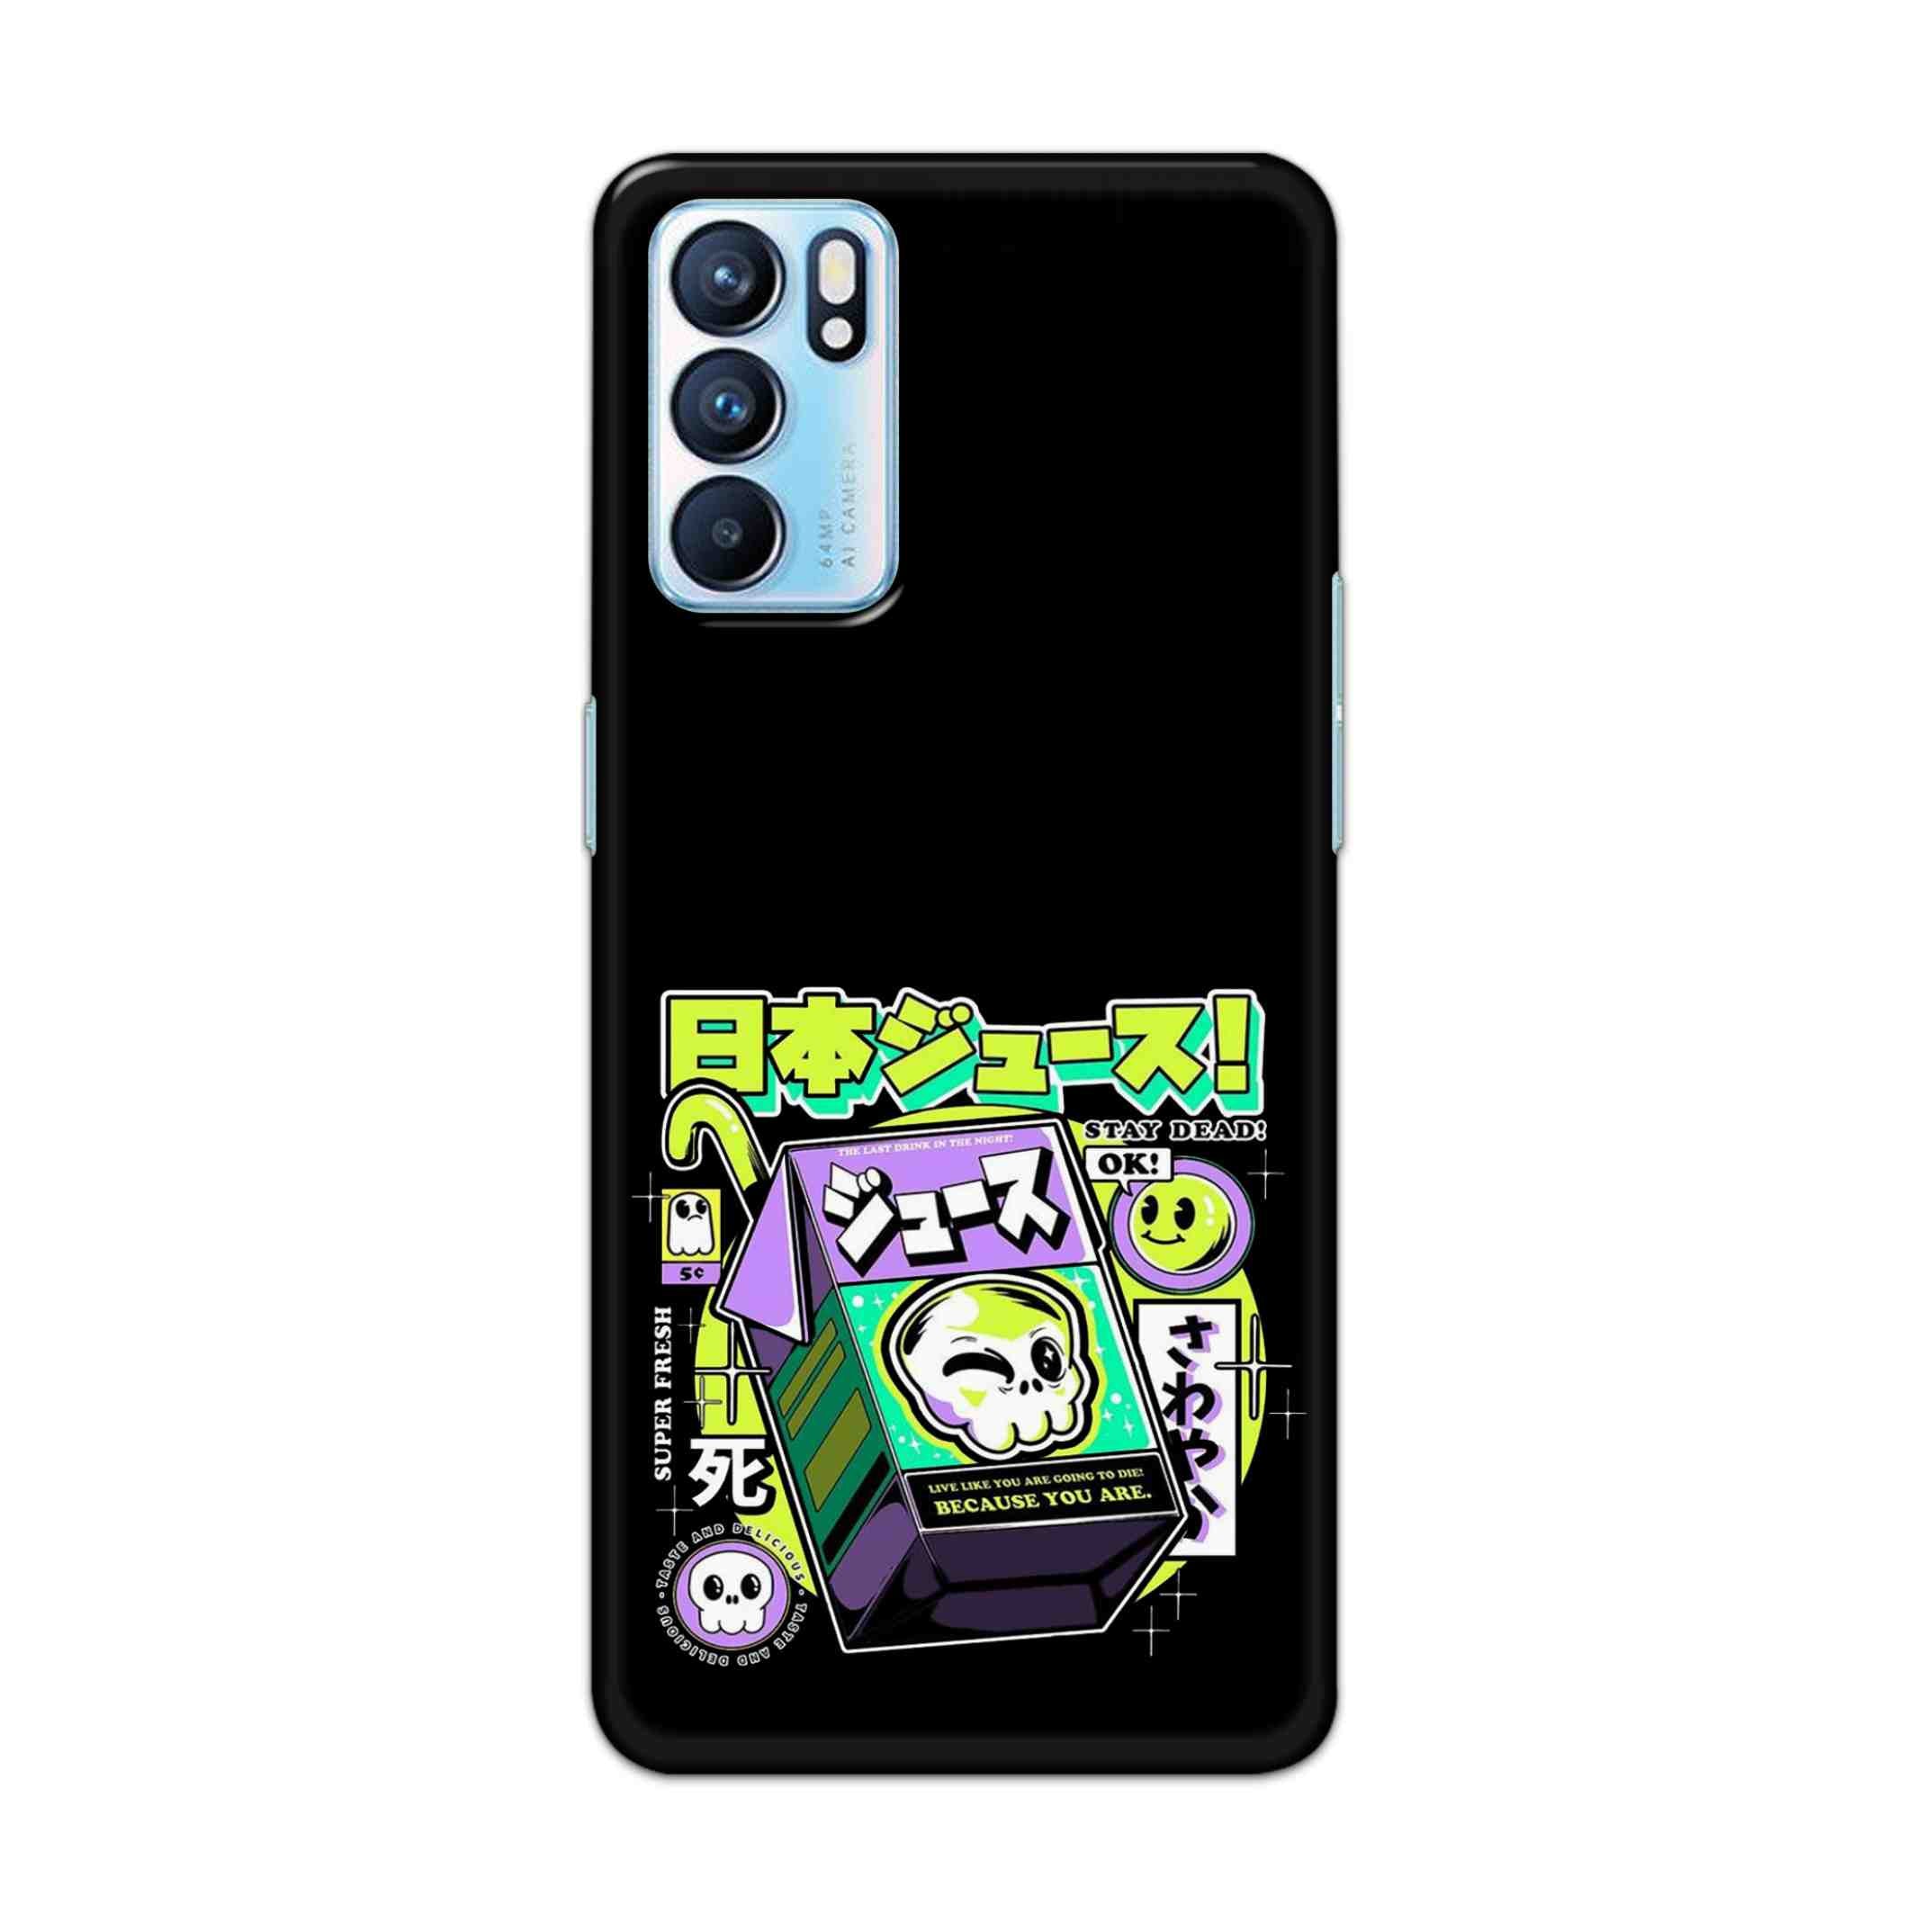 Buy Because You Are Hard Back Mobile Phone Case Cover For OPPO RENO 6 Online